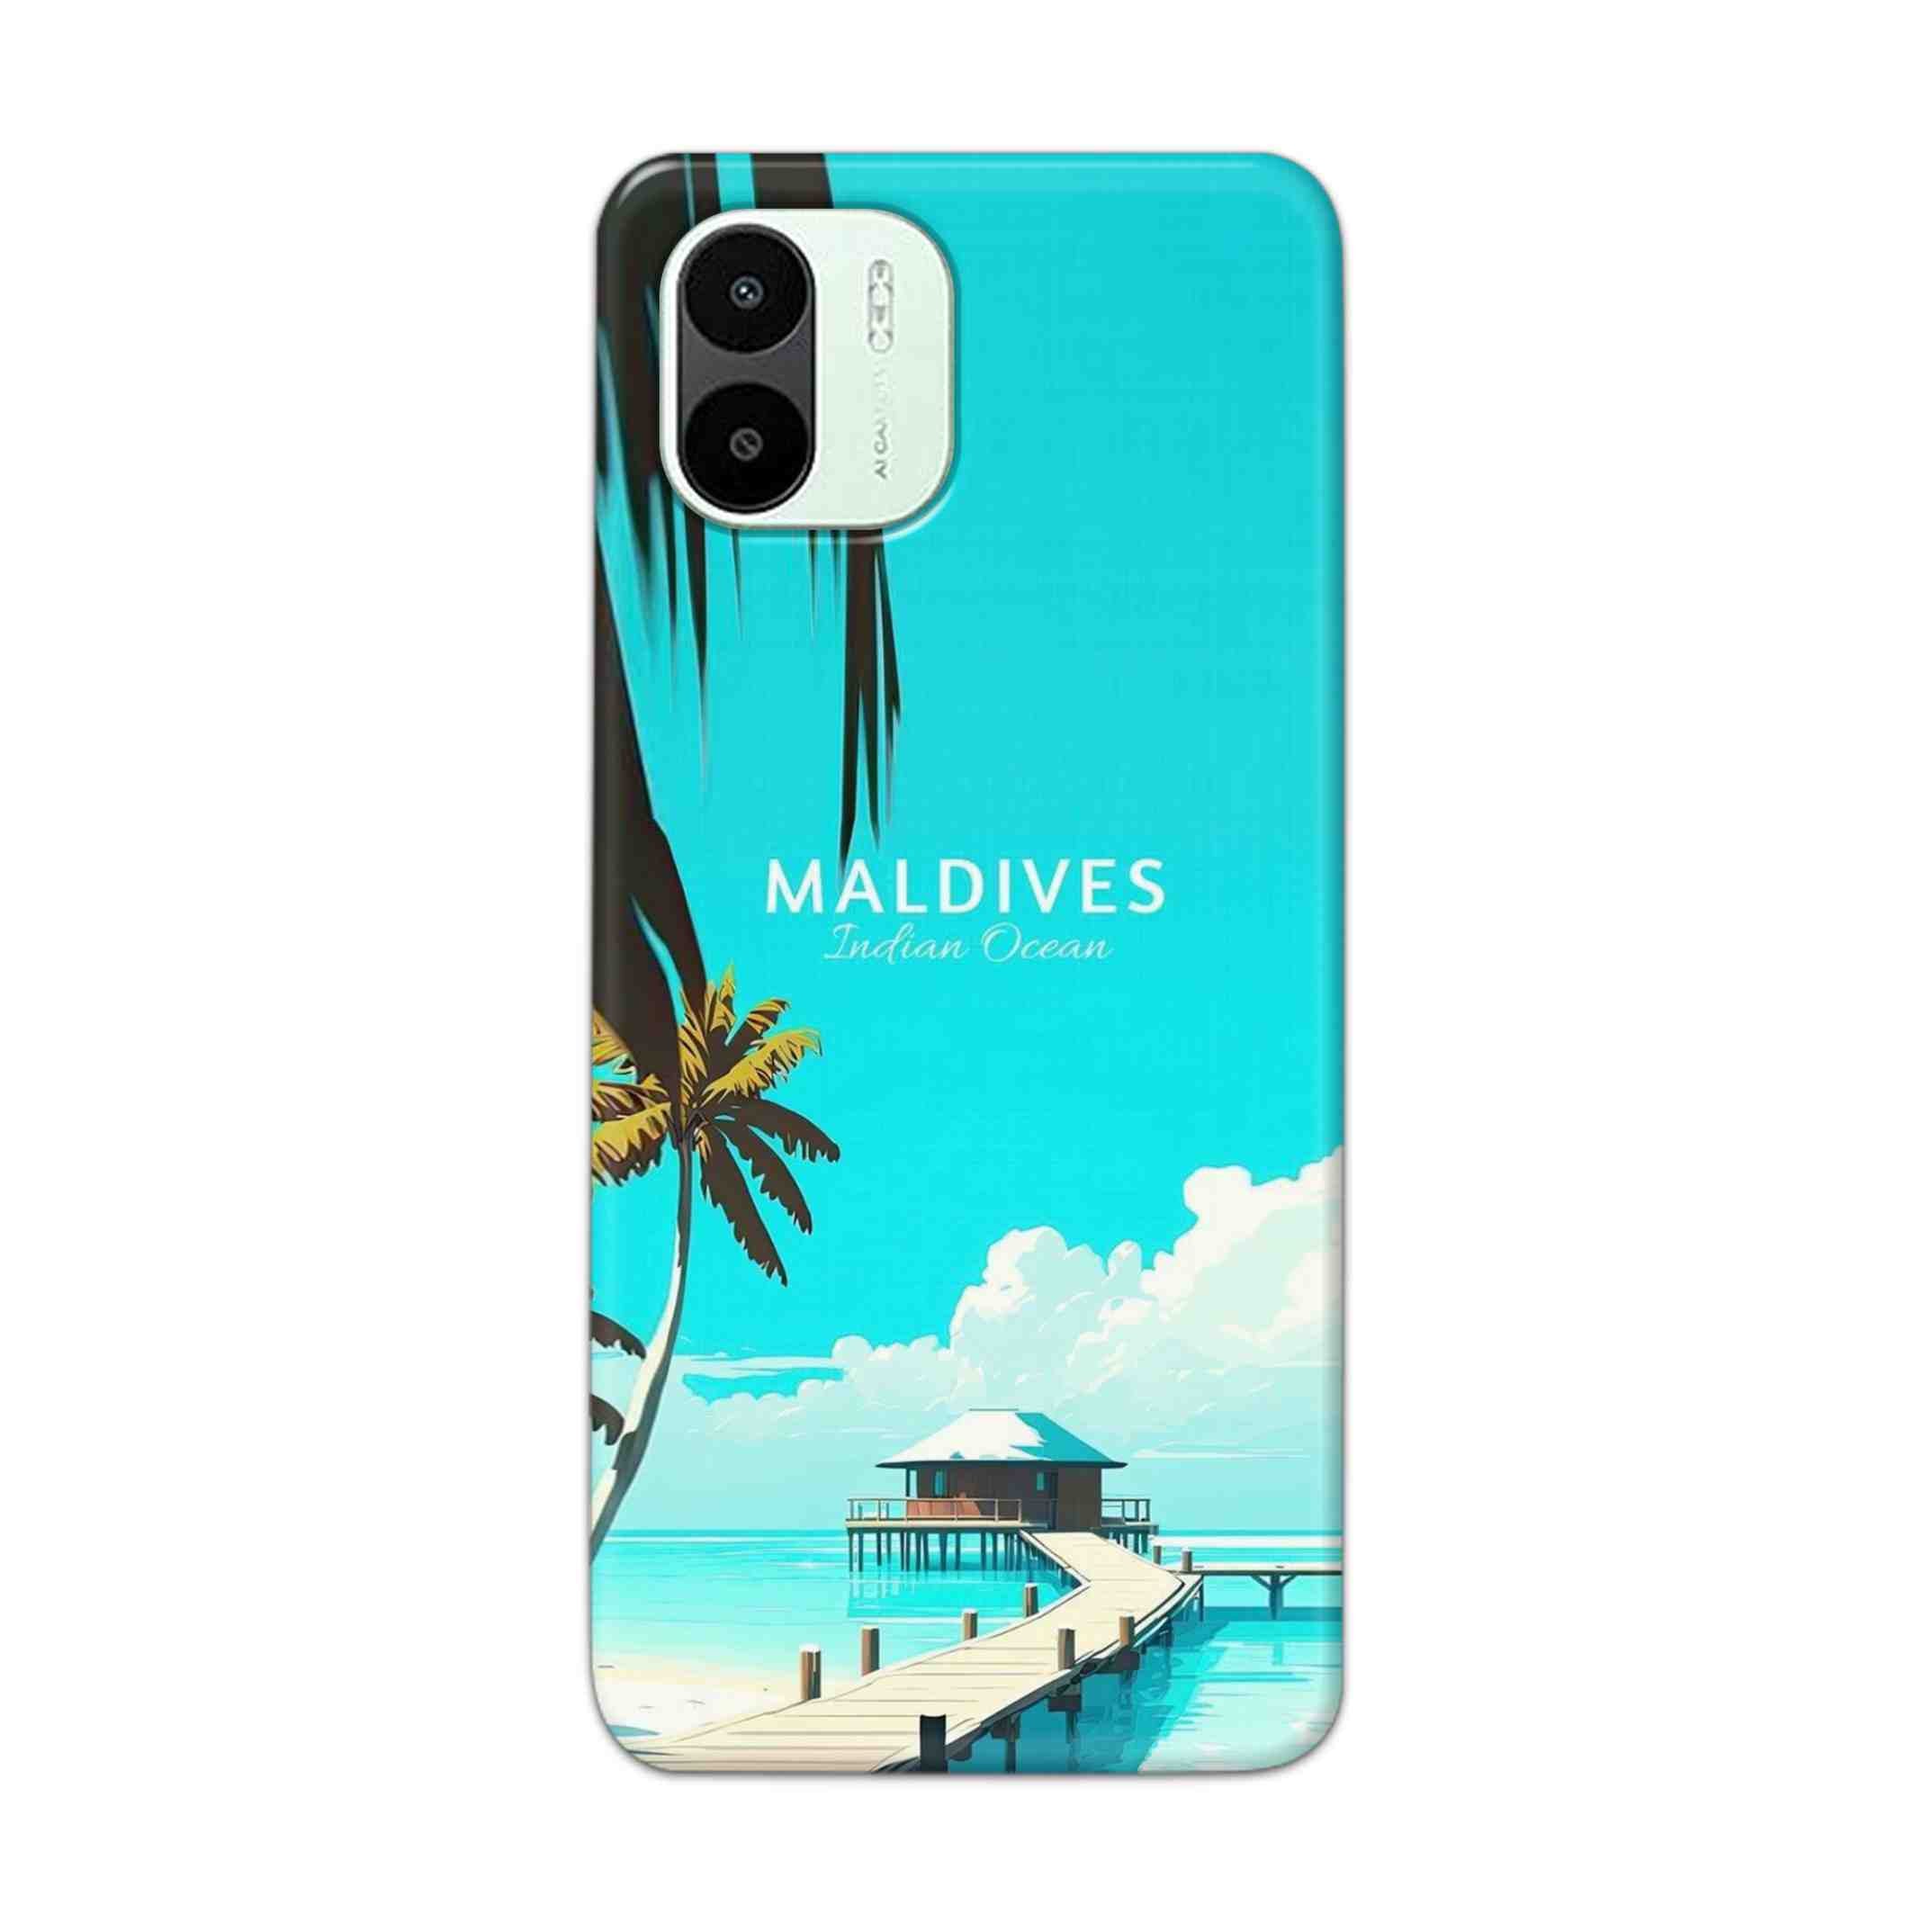 Buy Maldives Hard Back Mobile Phone Case Cover For Xiaomi Redmi A1 5G Online